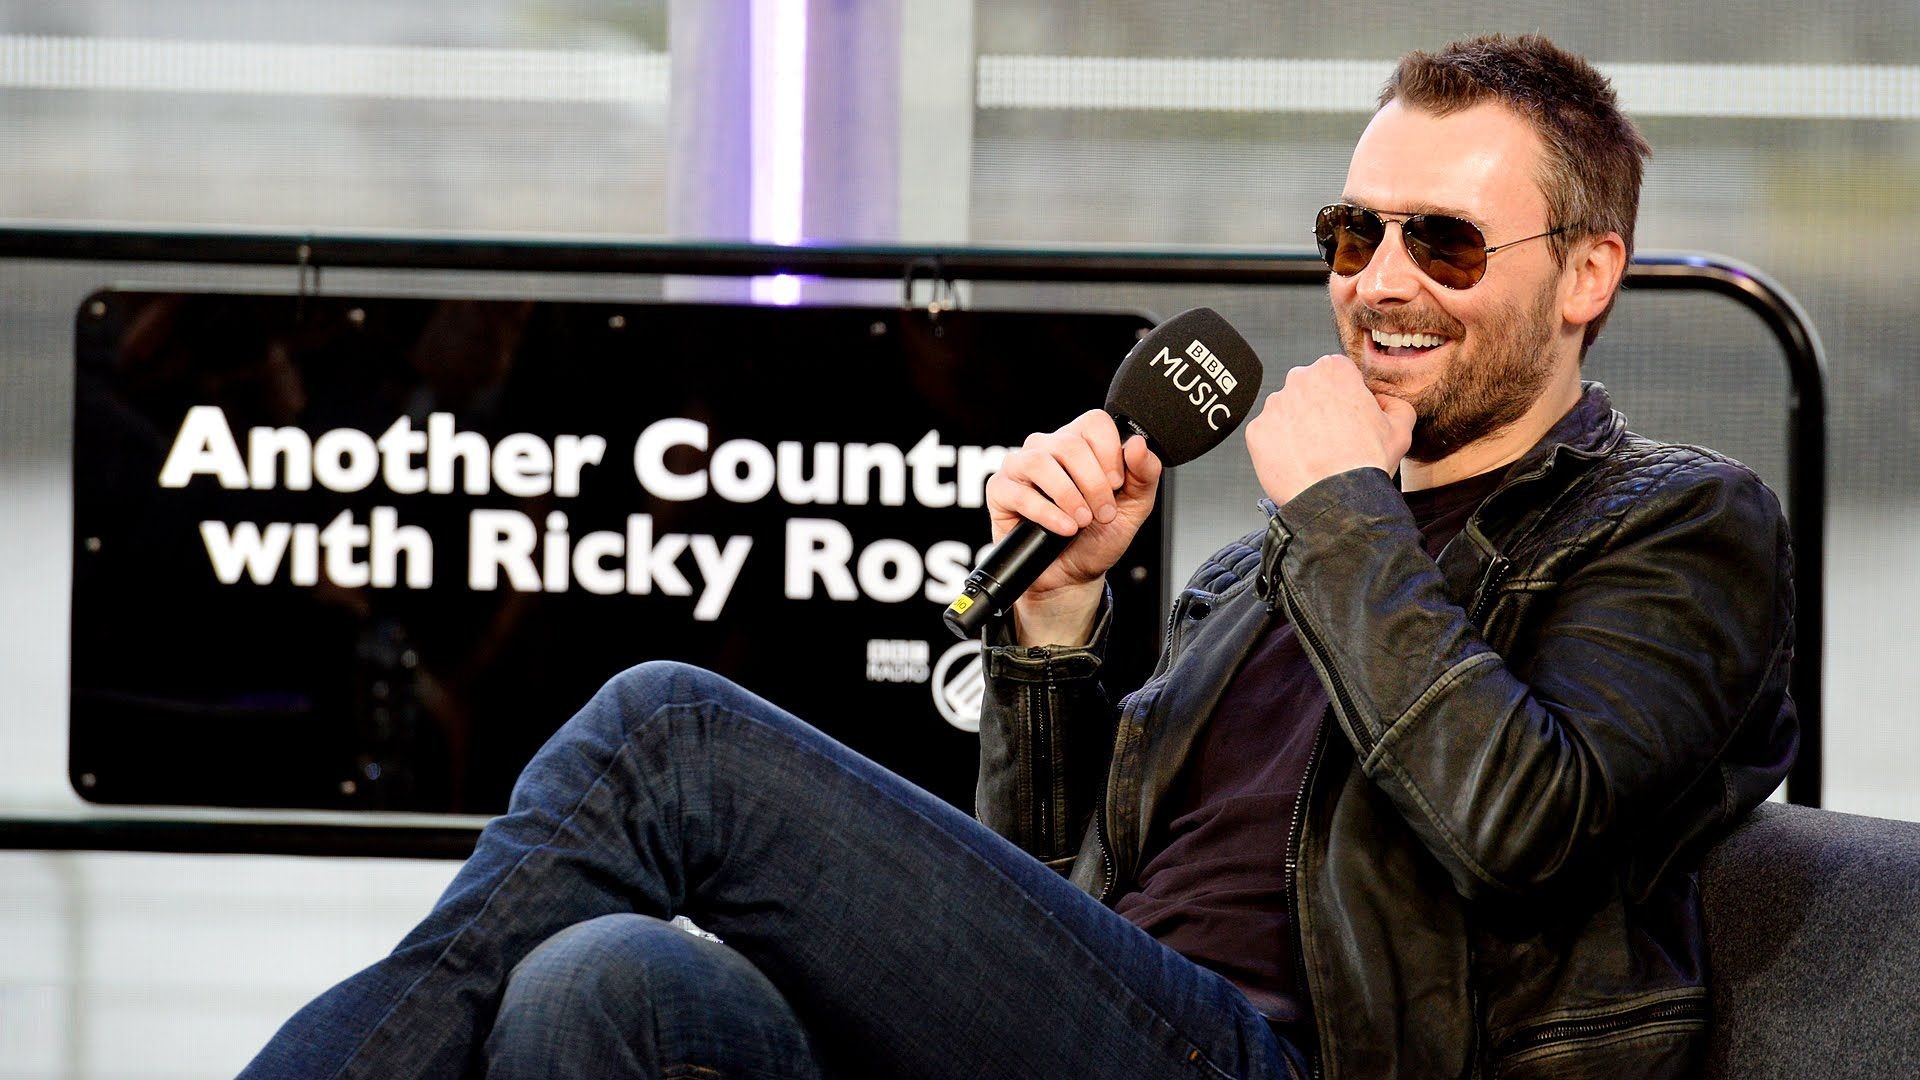 1920x1080 Eric Church - Interview and songs. YouTube. "